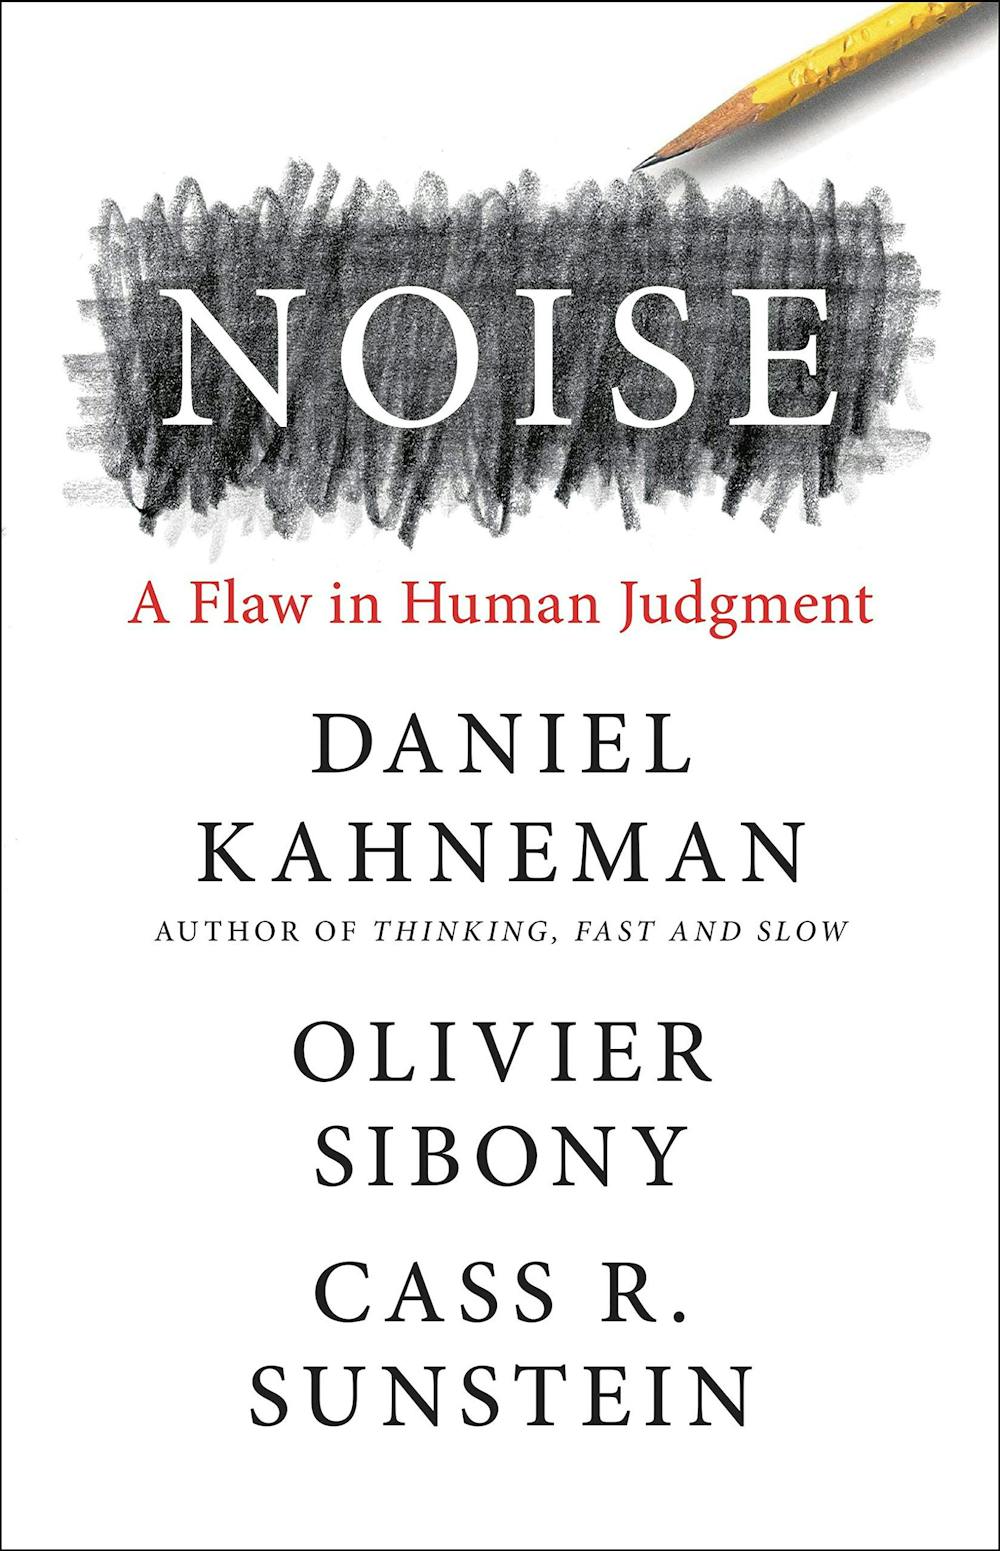 Daniel Kahneman on 'noise' – the flaw in human judgement harder to detect  than cognitive bias